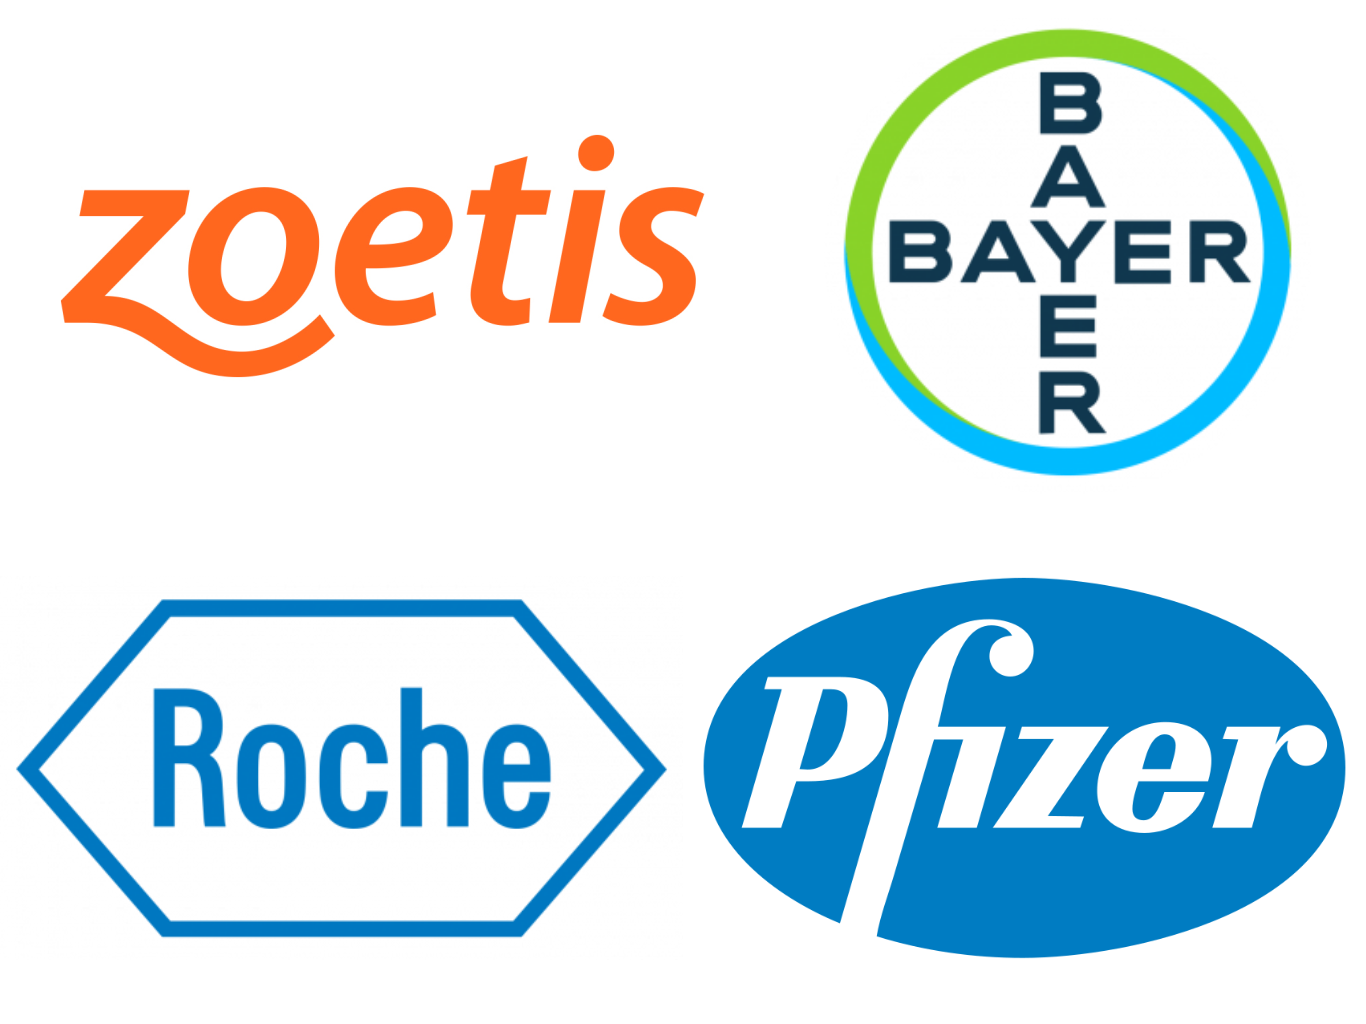 Logos of the mentioned companies